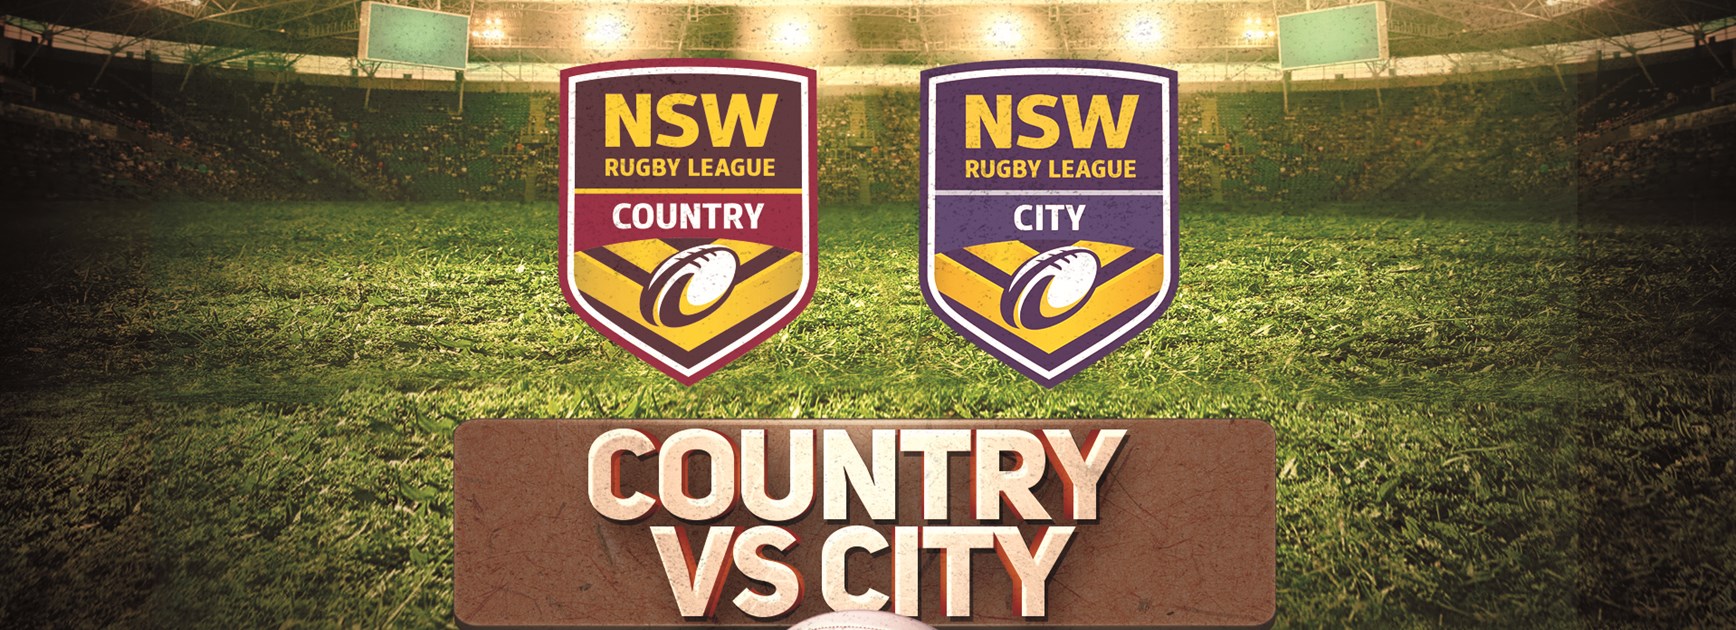 Country vs City squads named for representative weekend